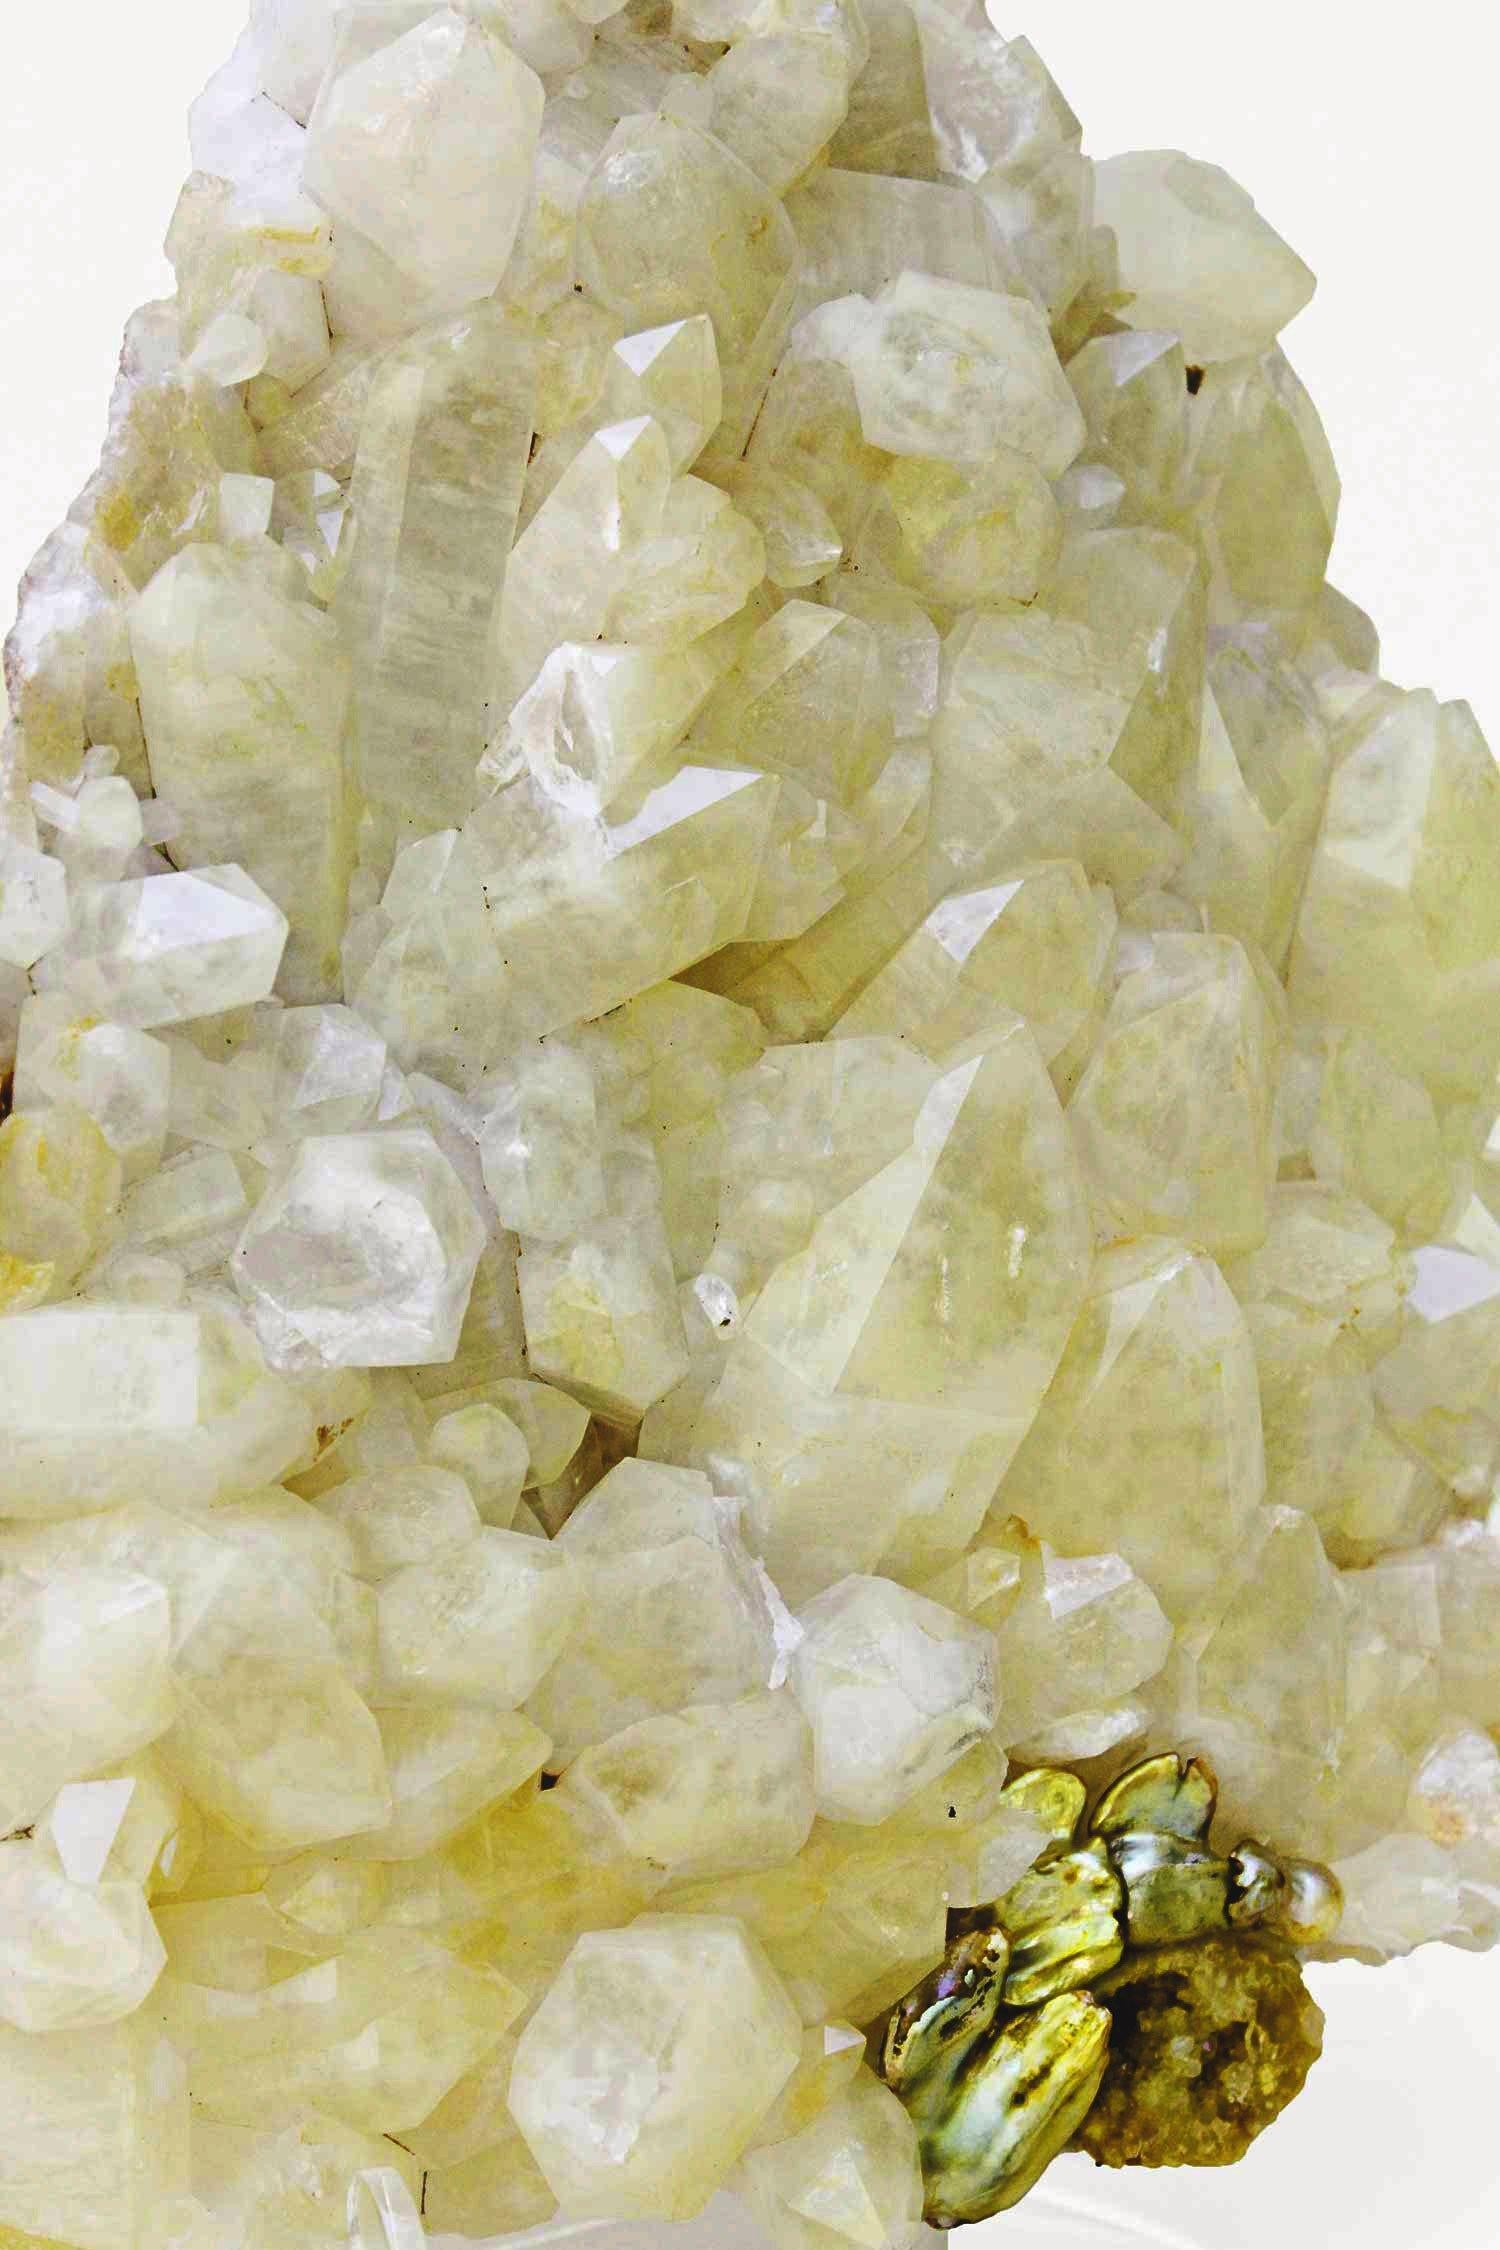 Lemon quartz crystal cluster with coordinating natural forming Baroque pearls and geode on a Lucite stand. Lemon Quartz is known for its color that has naturally formed in its matrix. This is an unusually large specimen of the particular mineral.